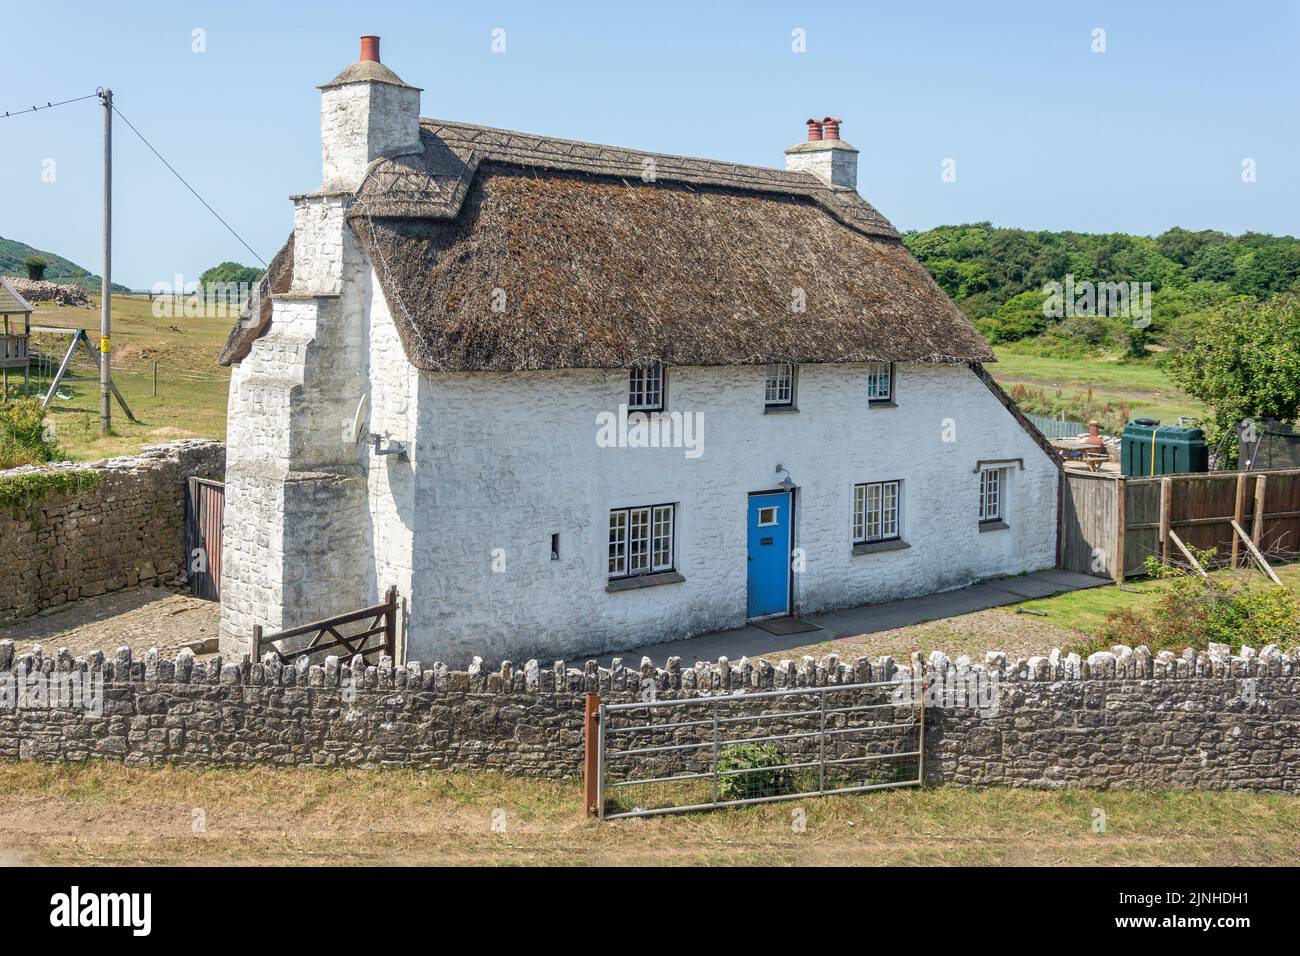 Thatched stone cottage by Ogmore Castle, Ogmore, Vale of Glamorgan (Bro Morgannwg), Wales (Cymru), United Kingdom Stock Photo